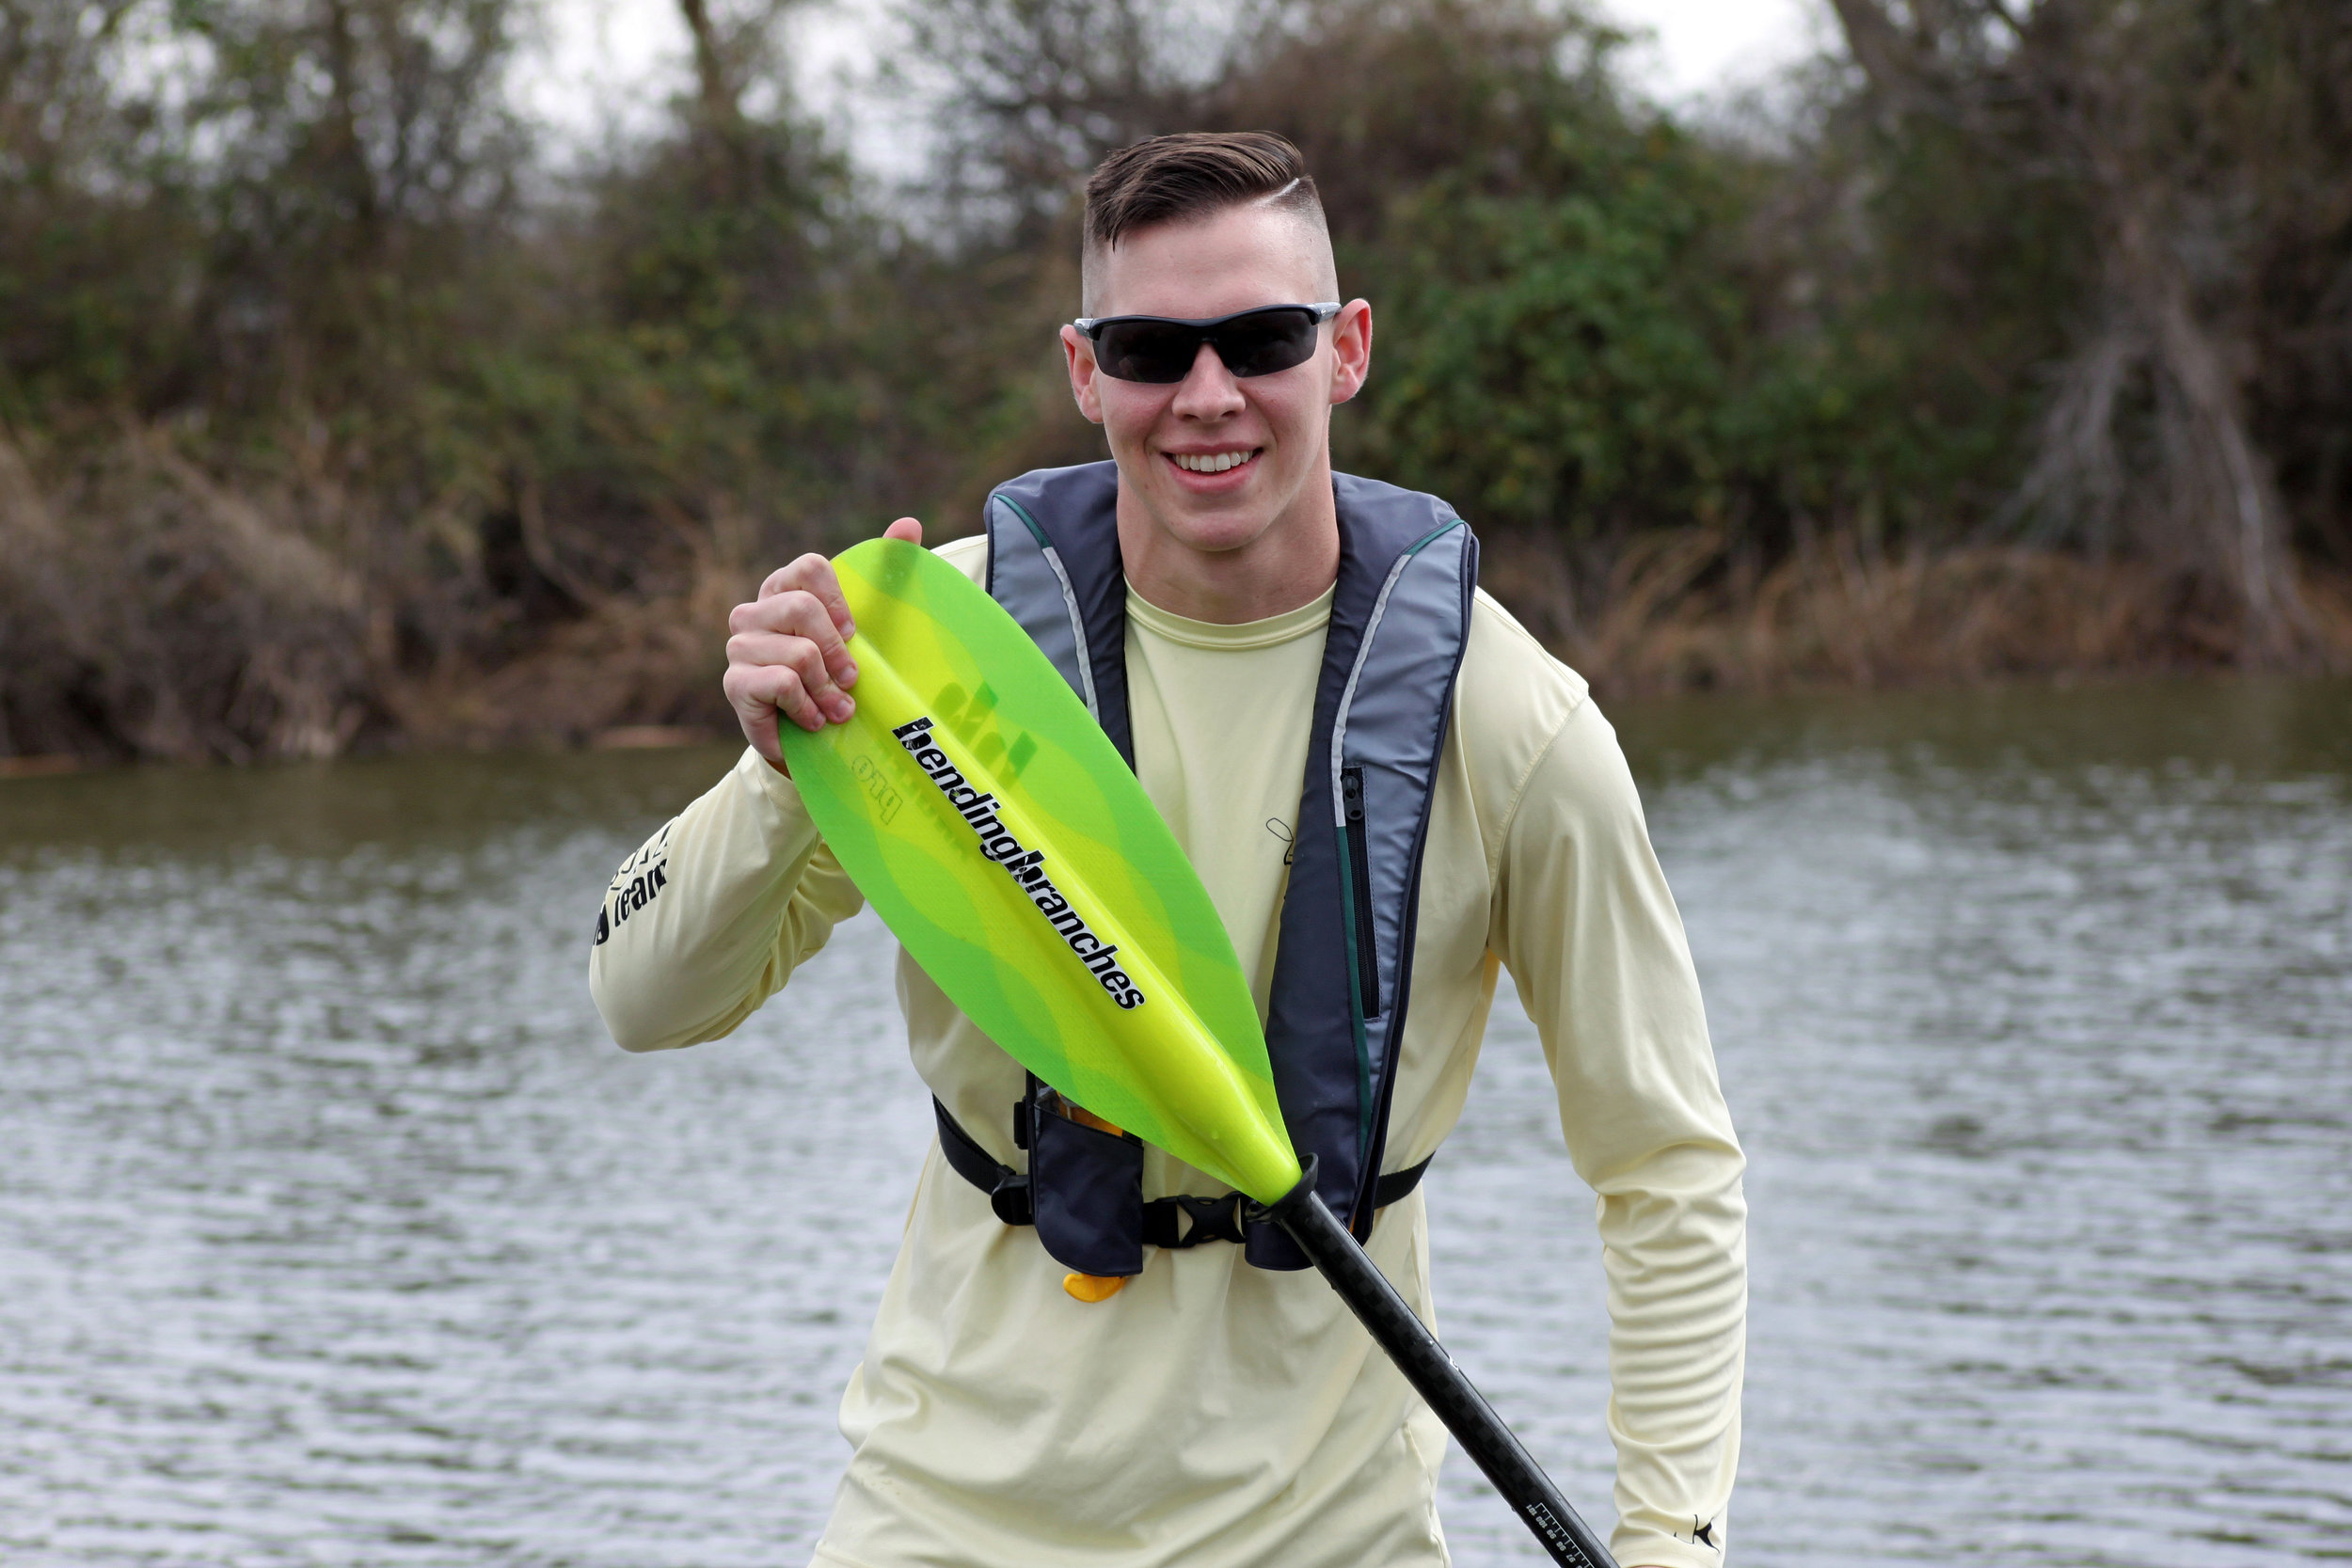 Bending Branches Angler Pro Review - Possibly the Best Paddle